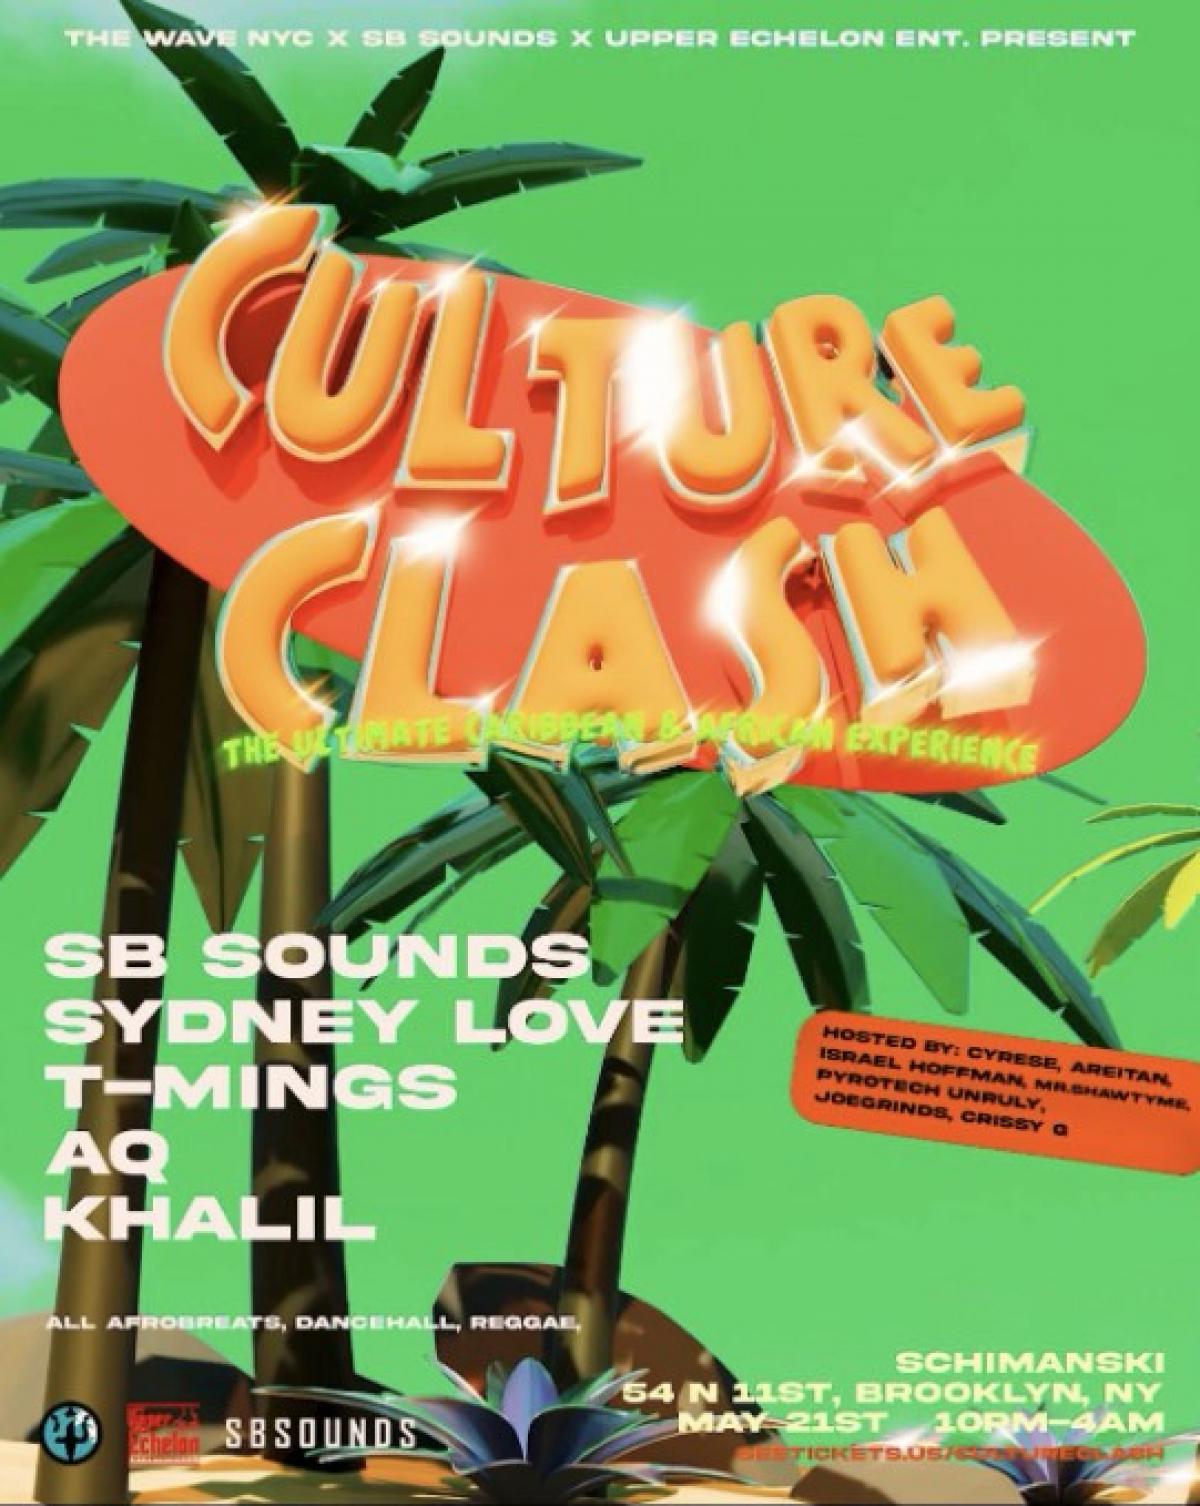 Culture Clash flyer or graphic.